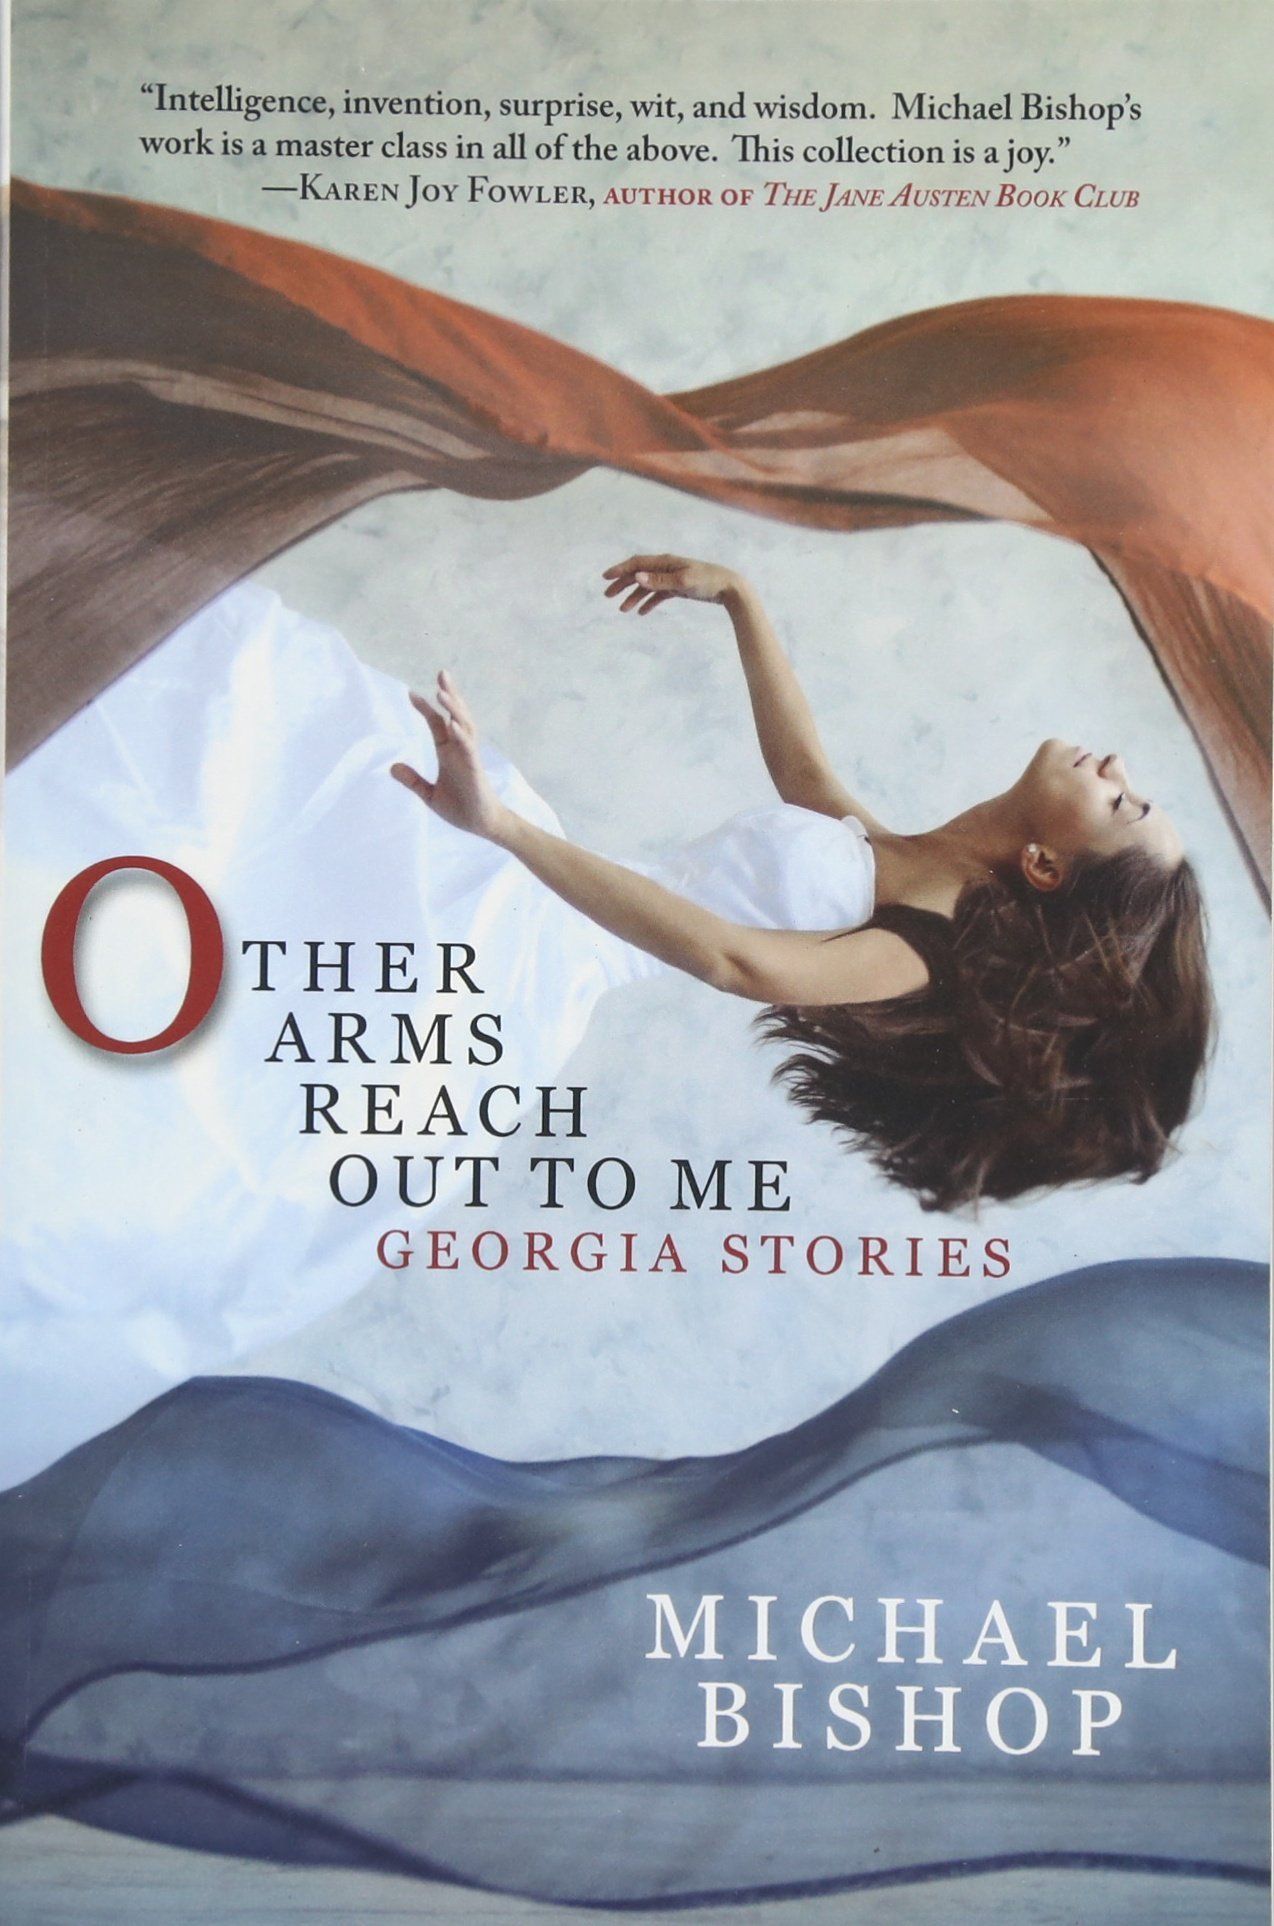 A Fiction of Miracles: On Michael Bishop’s “Other Arms Reach Out to Me: Georgia Stories”